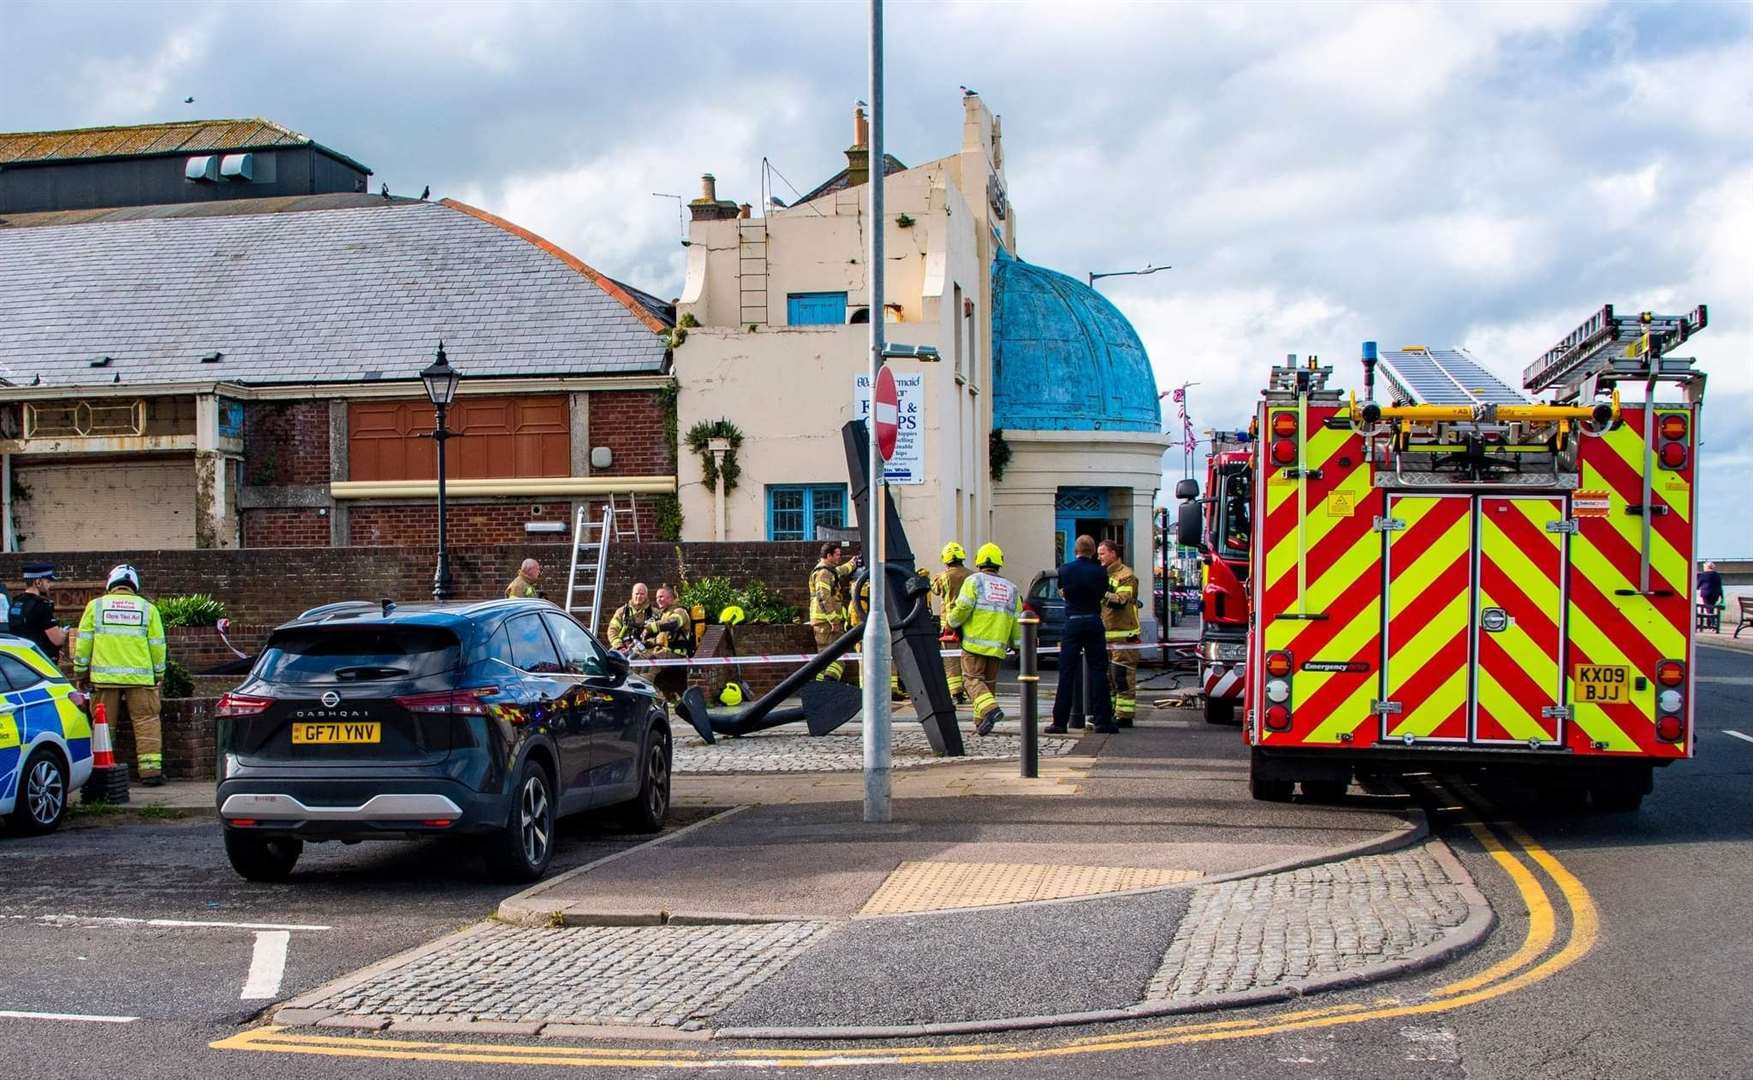 The dramatic scene at the Regent yesterday. Picture: Chris Mansfield